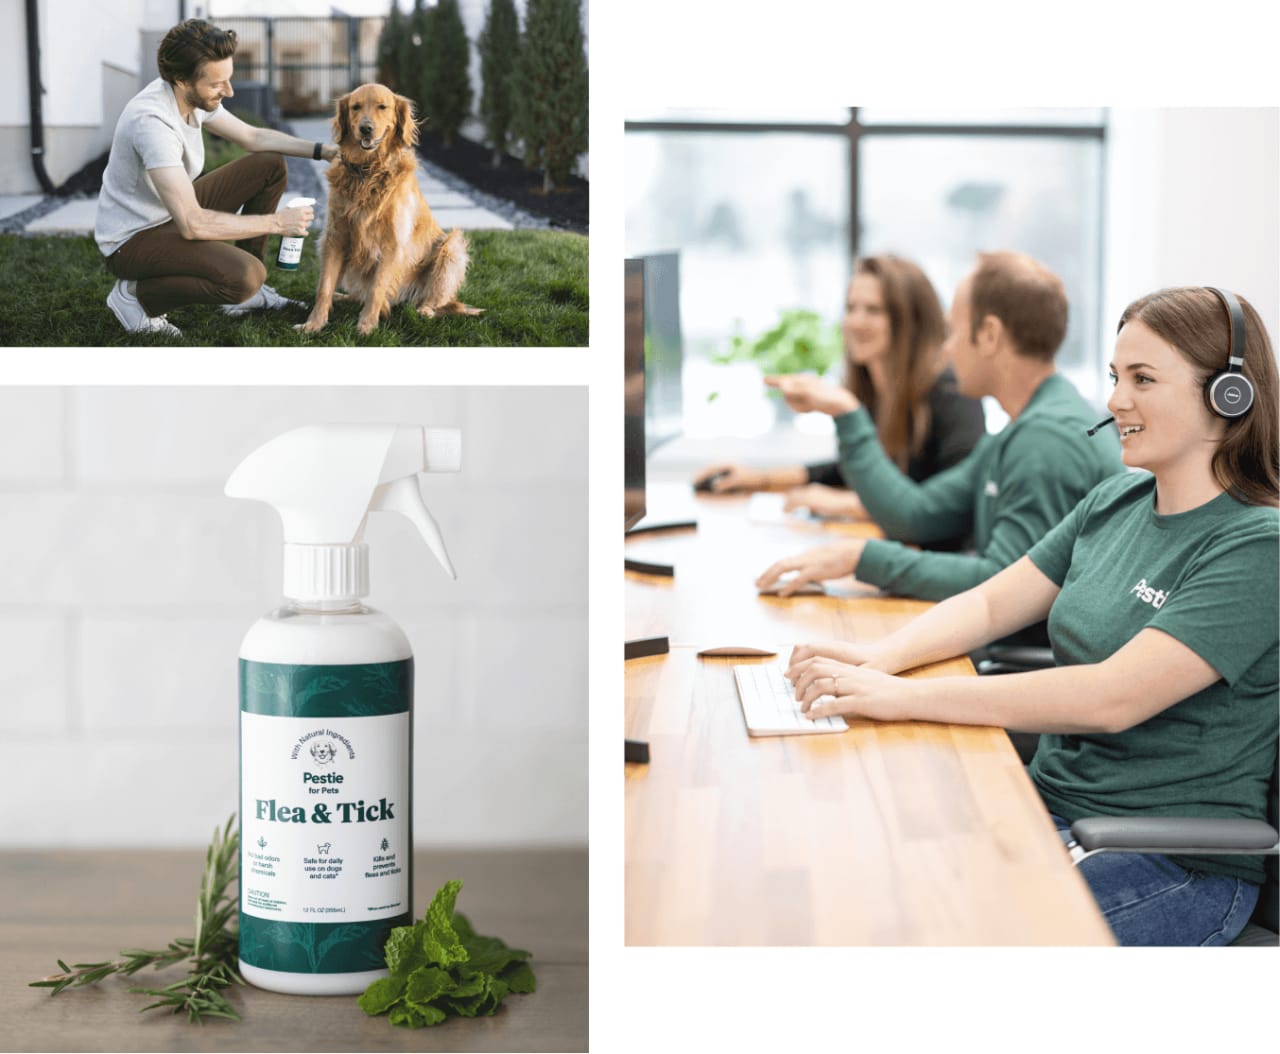 Collage of people on computers, spraying Pestie for Pets on a dog, and a bottle of Pestie for pets on a counter.